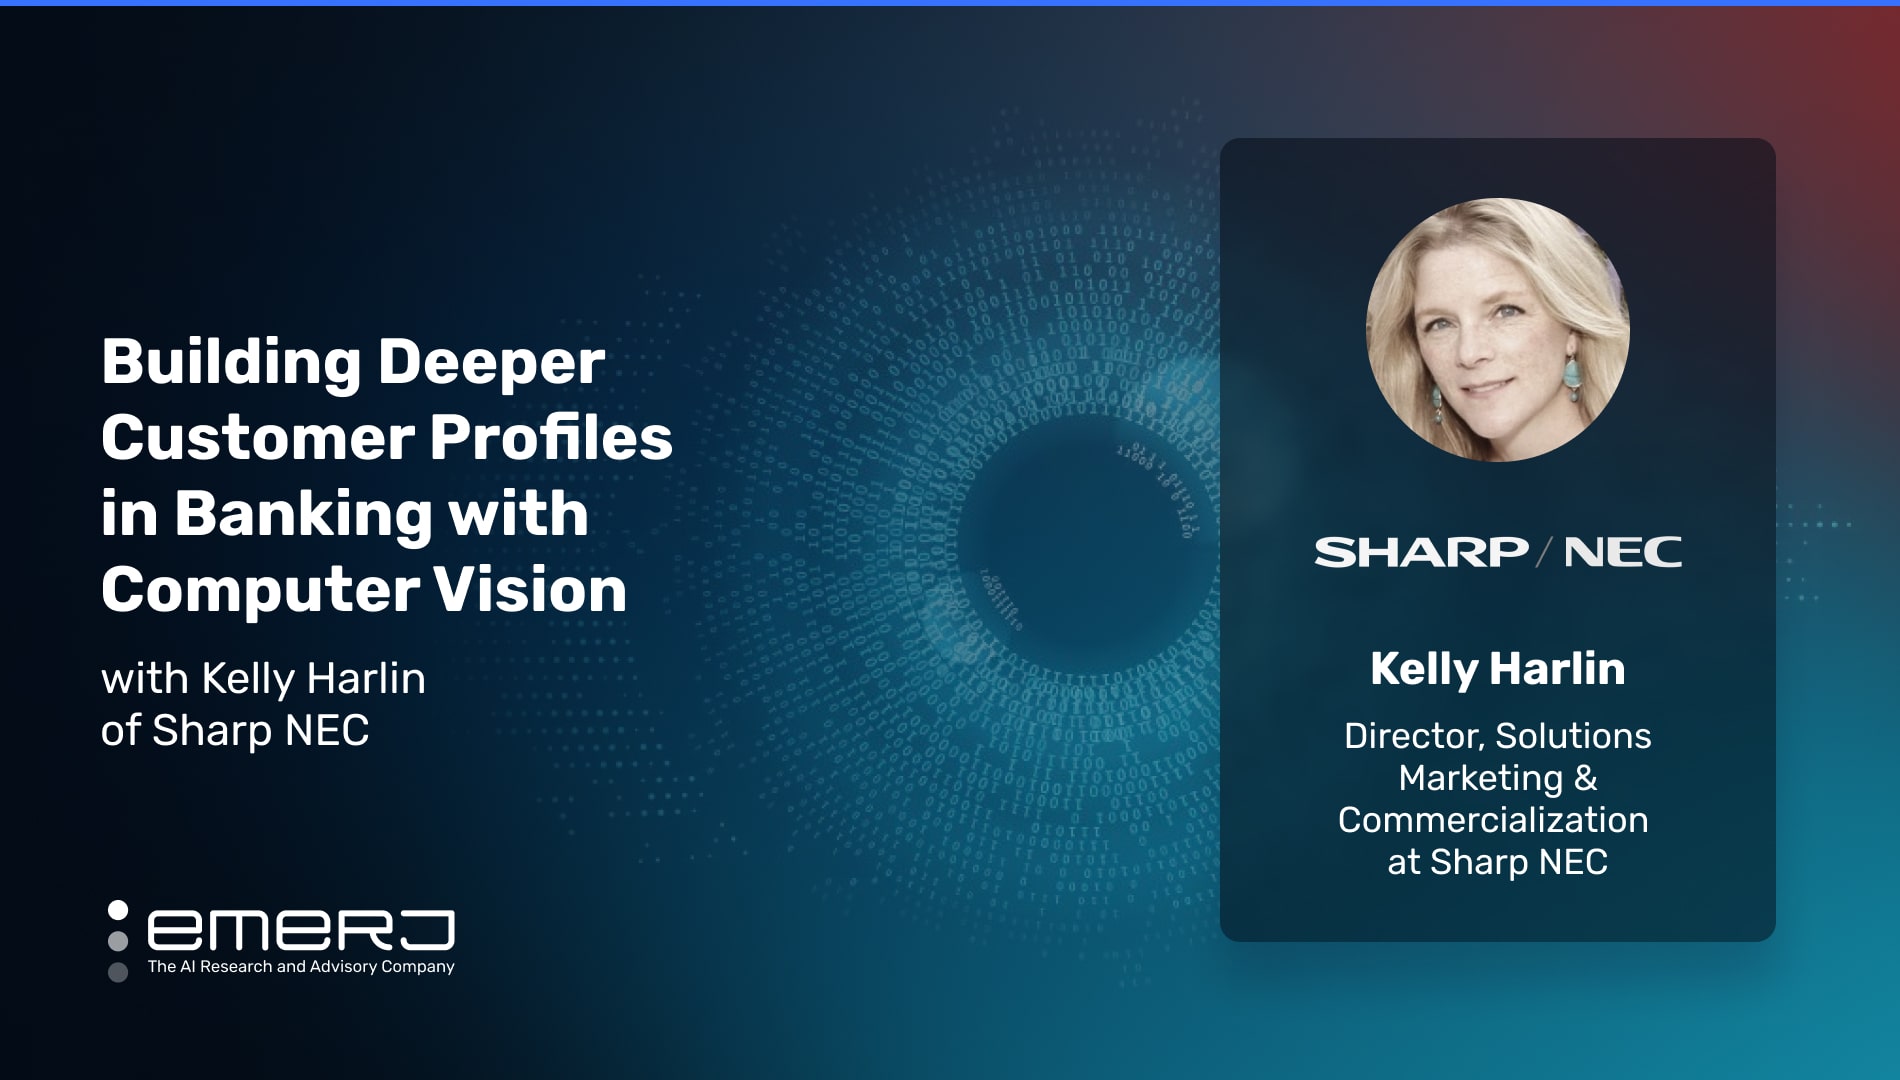 Building Deeper Customer Profiles in Banking with Computer Vision- with Kelly Harlin of Sharp NEC